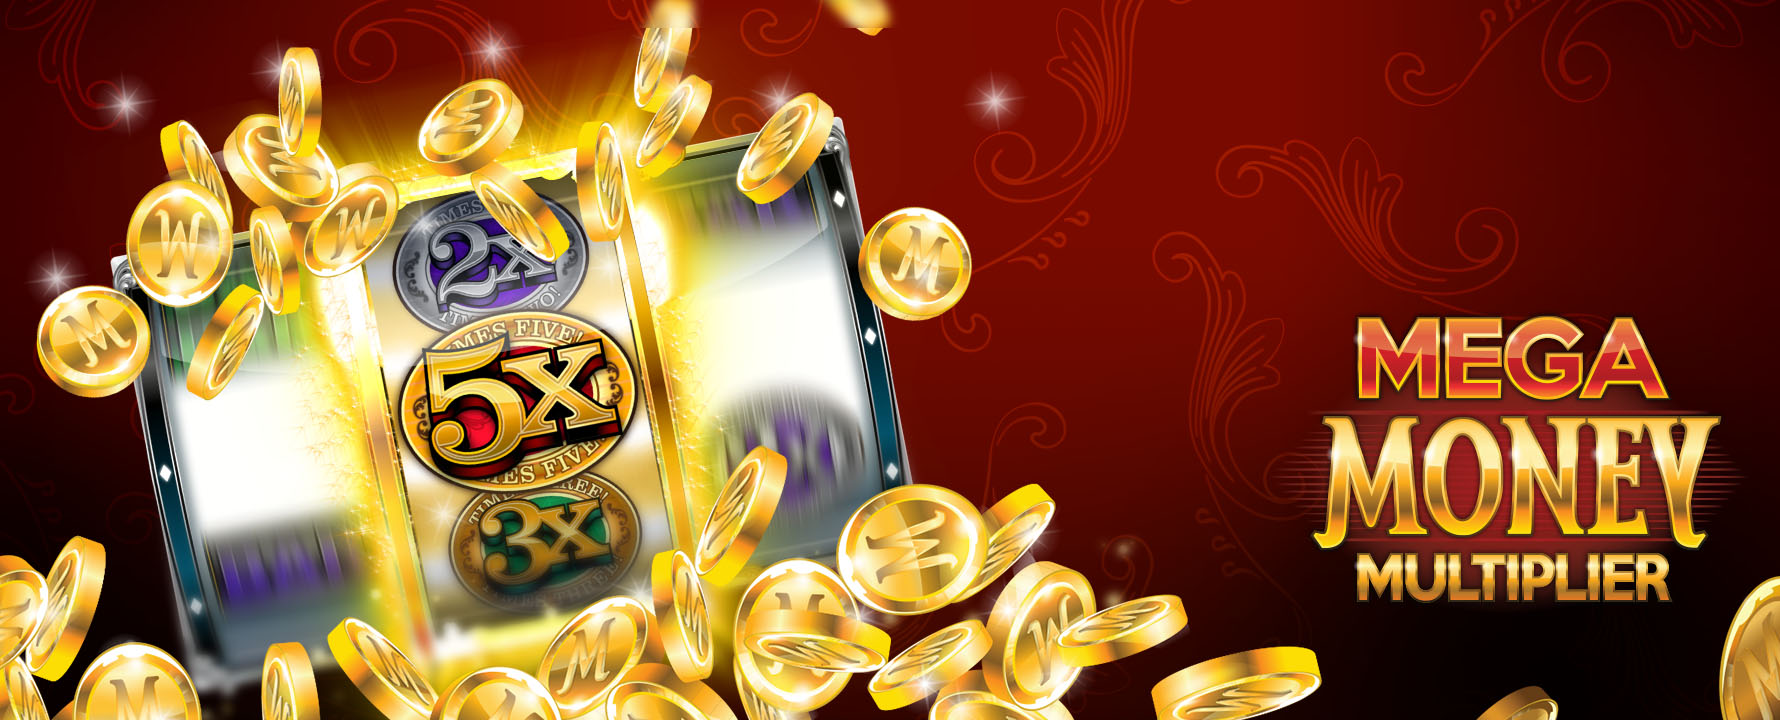 Take a trip back in time with the Mega Money Multiplier online slot